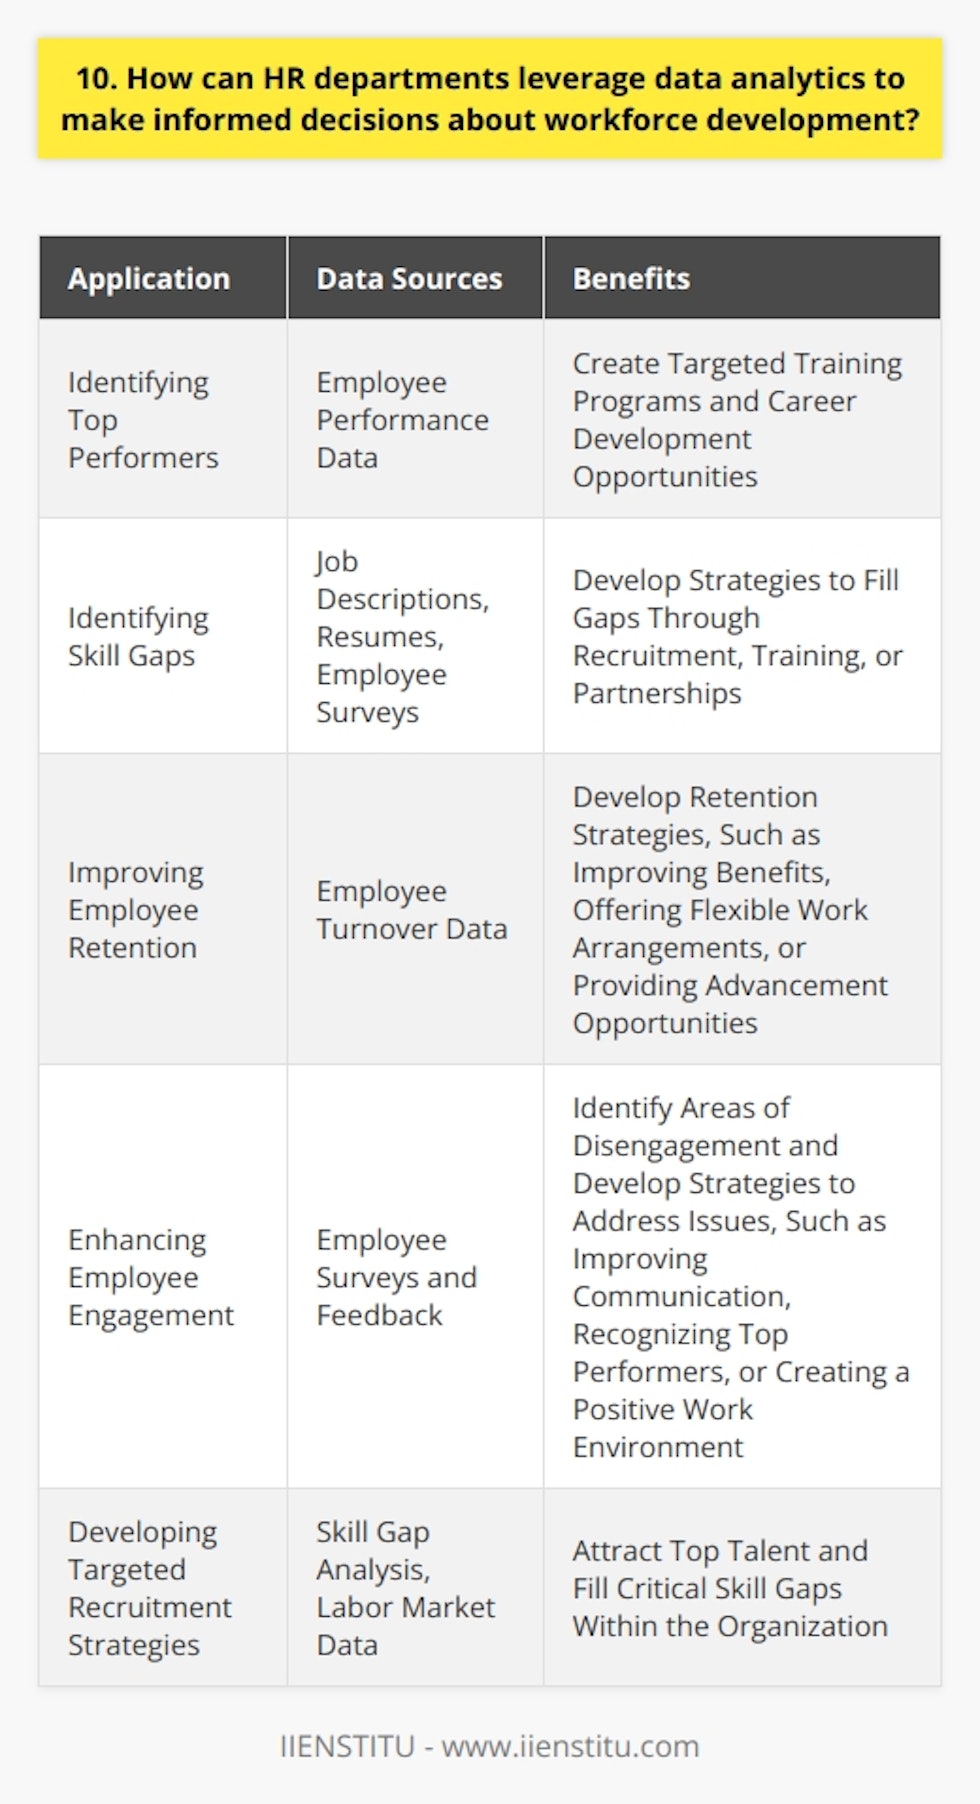 HR departments can leverage data analytics to make informed decisions about workforce development in several ways. By collecting and analyzing employee performance data, HR can identify top performers and areas for improvement. This information can be used to create targeted training programs and career development opportunities. Identifying Skill Gaps Data analytics can also help HR identify skill gaps within the organization. By analyzing job descriptions, resumes, and employee surveys, HR can determine which skills are lacking and develop strategies to fill those gaps. This might include recruiting new talent, providing training to current employees, or partnering with educational institutions. Improving Employee Retention Another way HR can use data analytics is to improve employee retention. By analyzing employee turnover data, HR can identify patterns and trends that may be contributing to high turnover rates. This information can be used to develop retention strategies, such as improving employee benefits, offering flexible work arrangements, or providing opportunities for advancement. Enhancing Employee Engagement Data analytics can also be used to enhance employee engagement. By collecting and analyzing data from employee surveys and feedback, HR can identify areas where employees are disengaged and develop strategies to address those issues. This might include improving communication, recognizing and rewarding top performers, or creating a more positive work environment. In my experience, using data analytics has been incredibly valuable for making informed decisions about workforce development. By analyzing employee performance data, we were able to identify areas where our team needed additional training and support. We also used data to develop targeted recruitment strategies that helped us attract top talent and fill critical skill gaps within the organization. Overall, data analytics is a powerful tool that HR departments can use to make informed decisions about workforce development. By leveraging data to identify areas for improvement, develop targeted strategies, and measure the effectiveness of those strategies, HR can help organizations build a more skilled, engaged, and productive workforce.